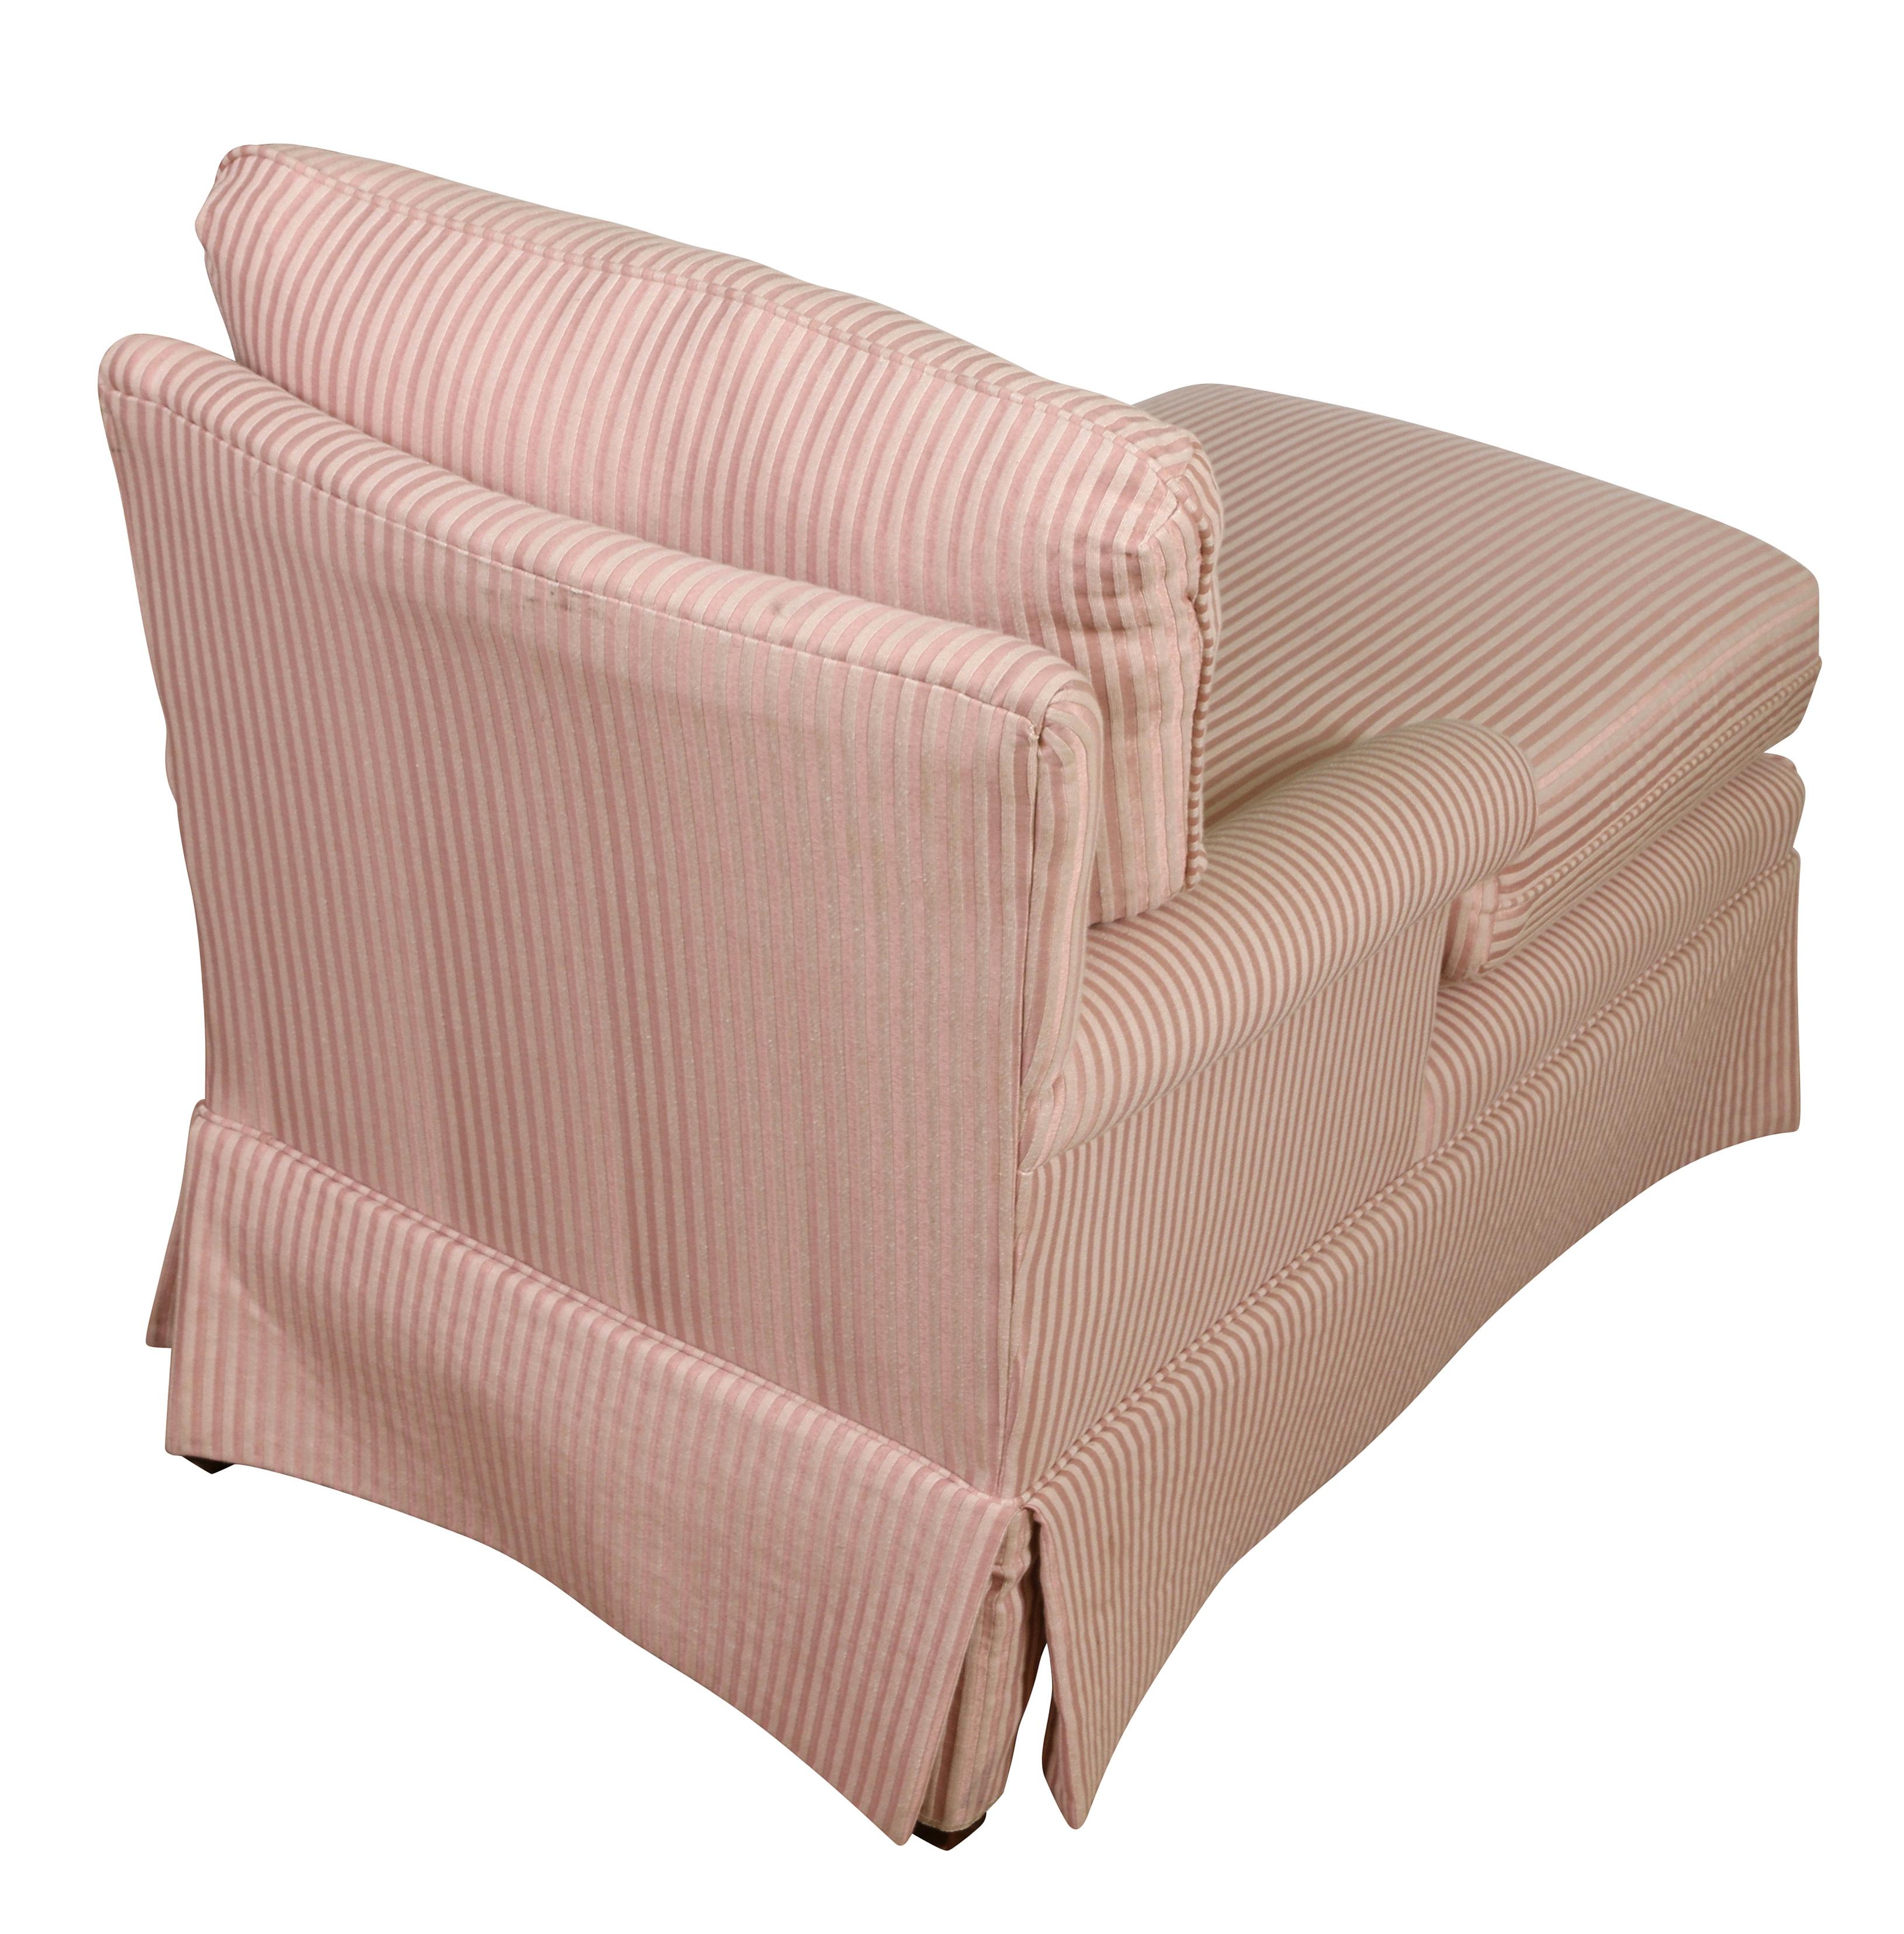 American Pink Chaise Longue